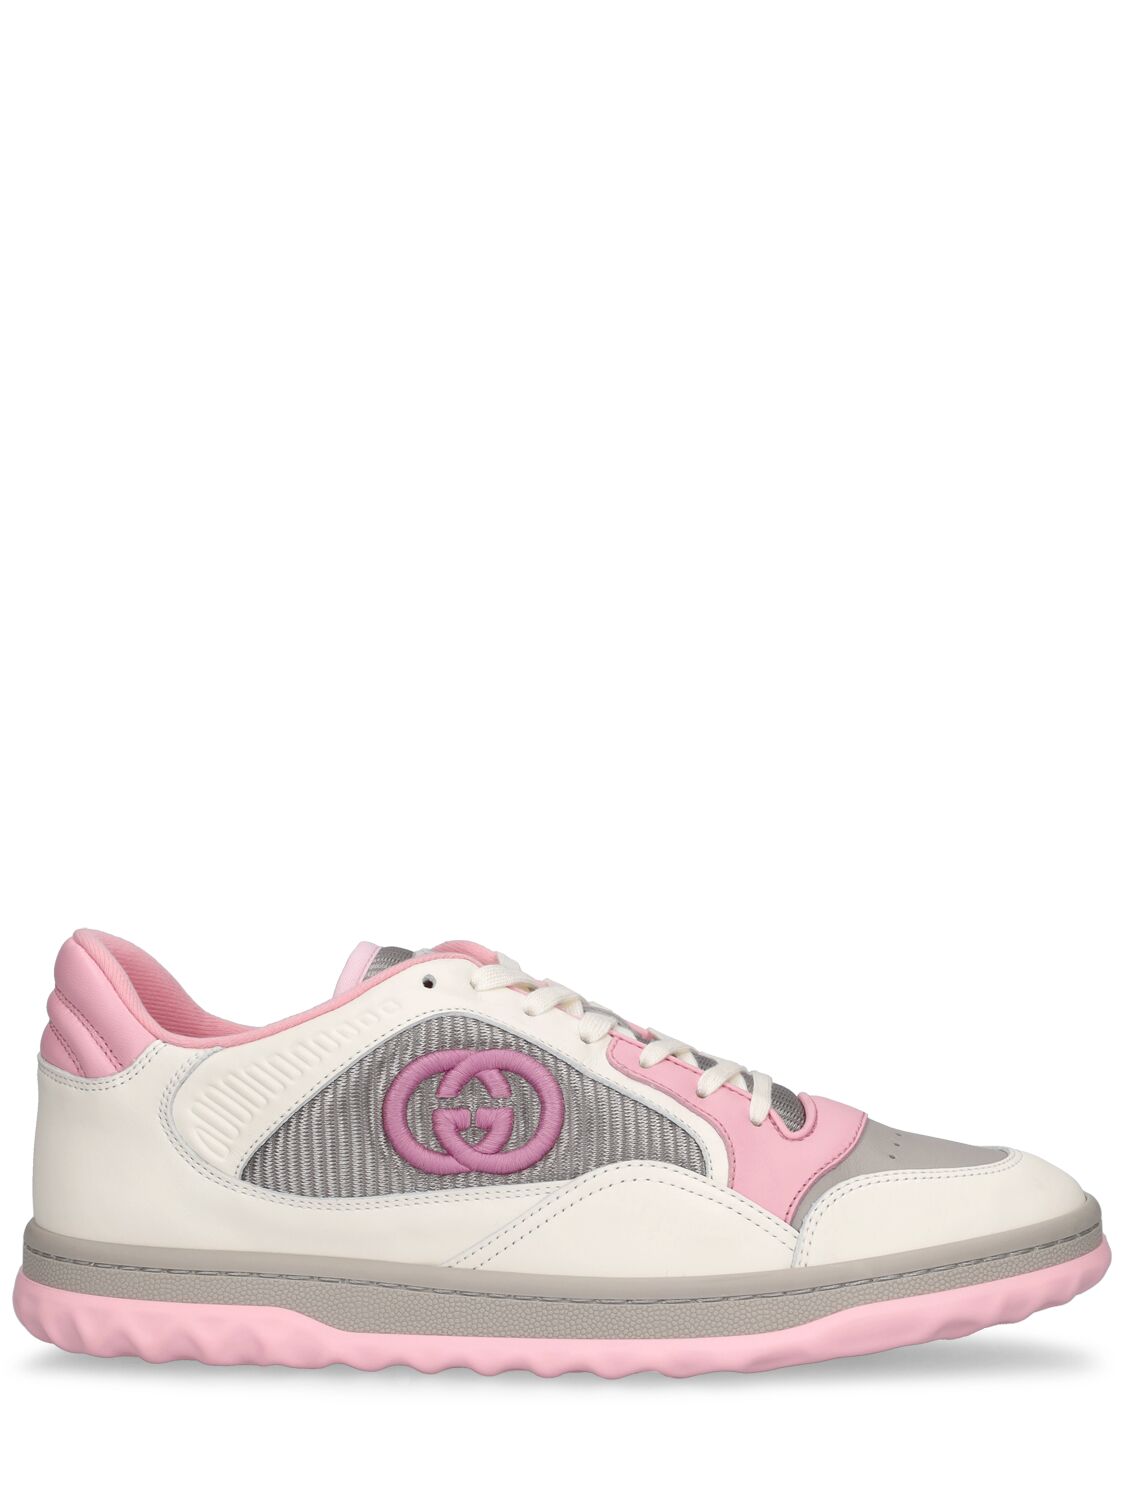 Gucci 31mm Mac 80 Leather Sneakers In Off White,pink